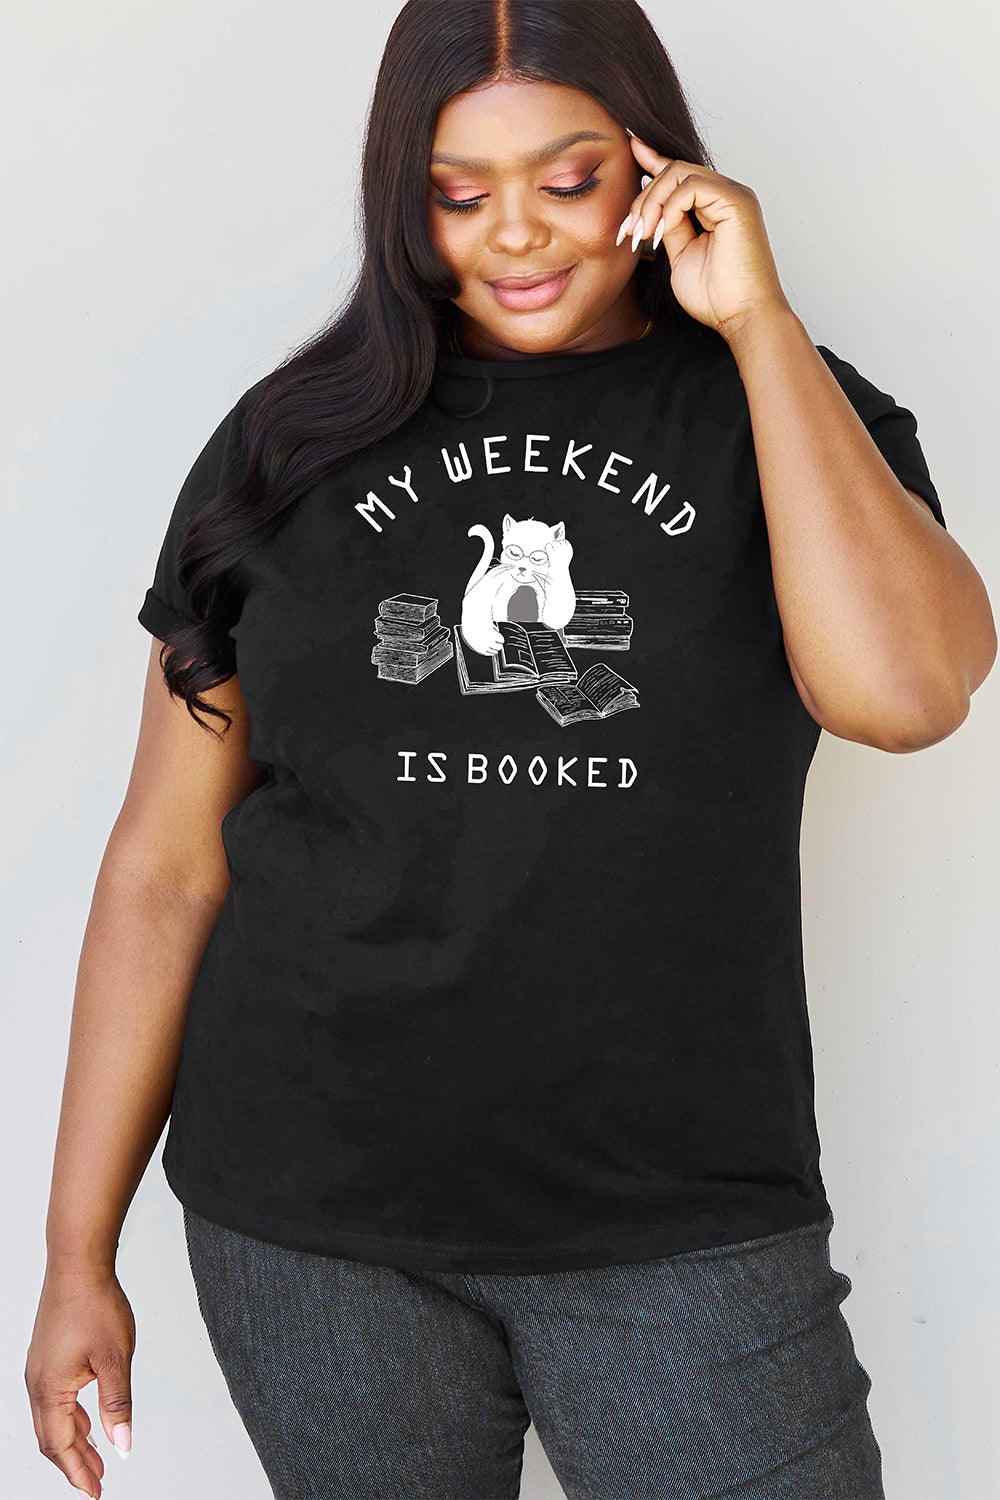 Full Size MY WEEKEND IS BOOKED Graphic T-Shirt - T-Shirts - Shirts & Tops - 5 - 2024